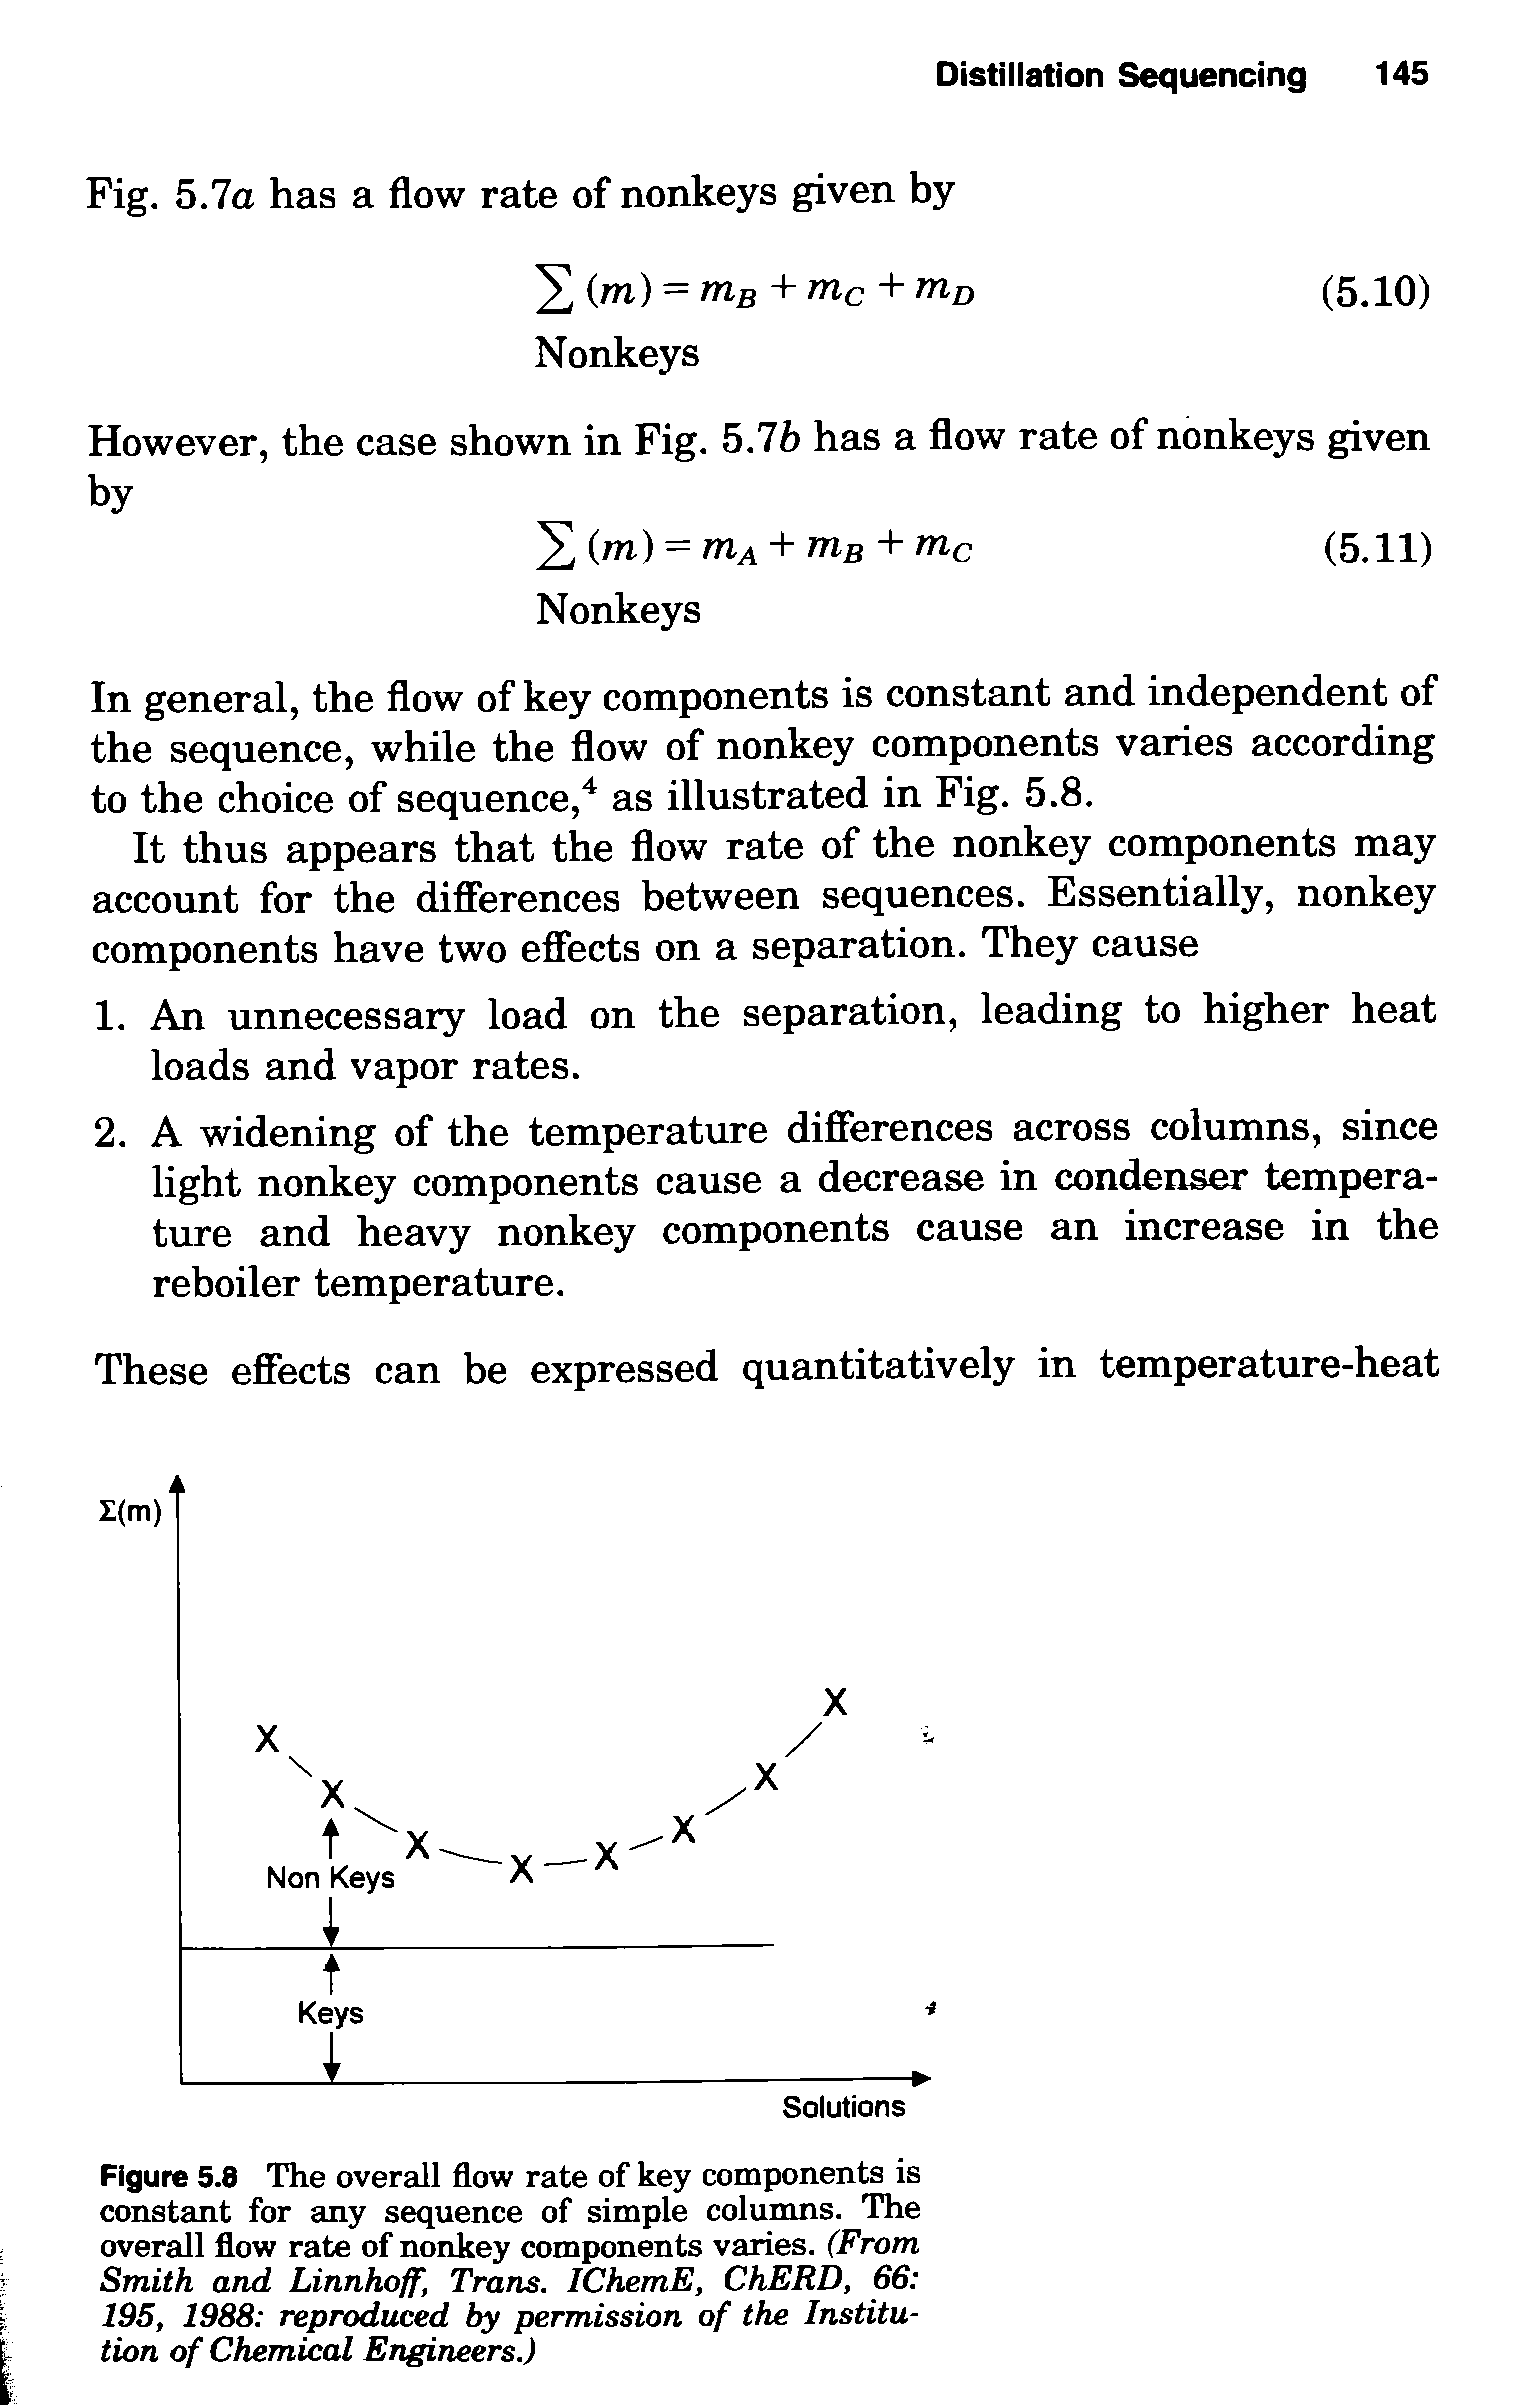 Figure 5.8 The overall flow rate of key components is constant for any sequence of simple columns. The overall flow rate of nonkey components varies. (From Smith and Linnhoff, Trans. IChemE, ChERD, 66 195, 1988 reproduced by permission of the Institution of Chemical Engineers.)...